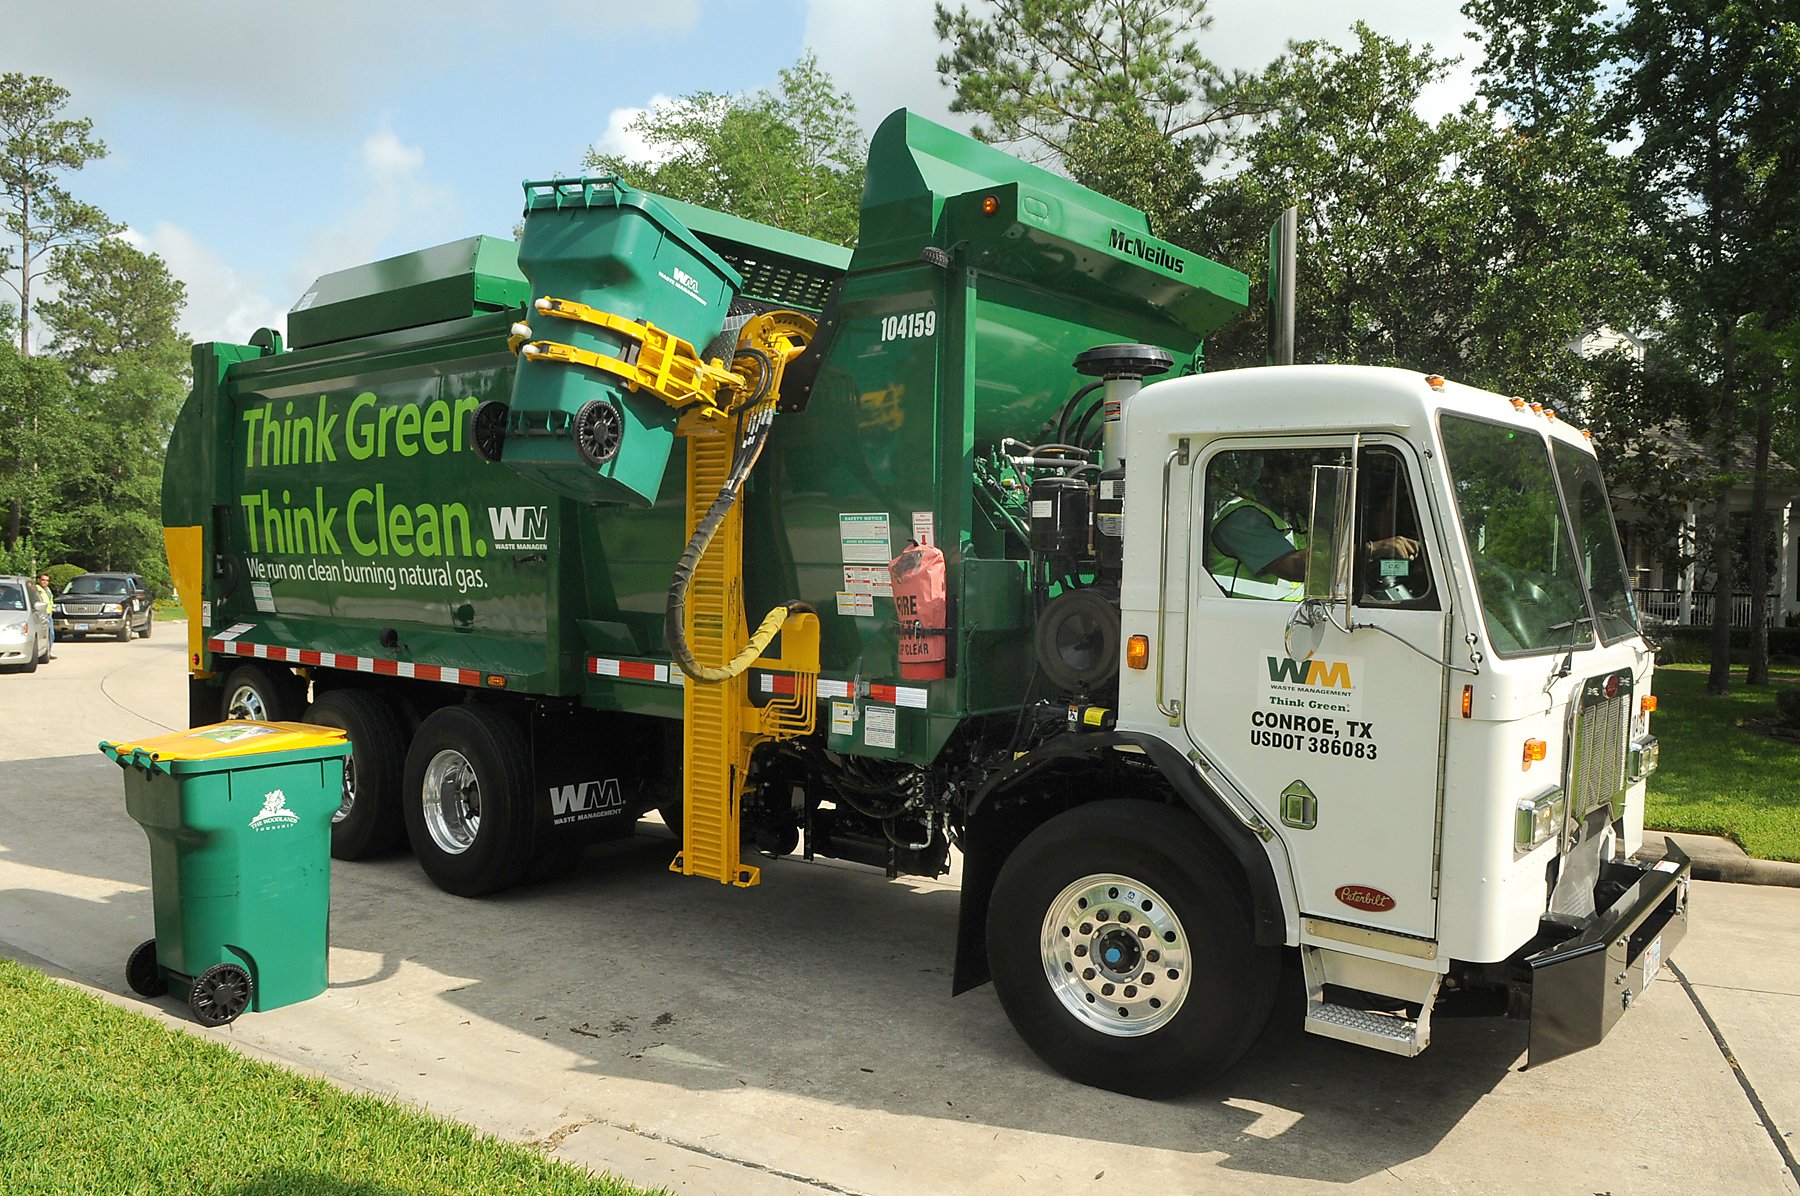 holiday recycling  The Woodlands Township Environmental Services